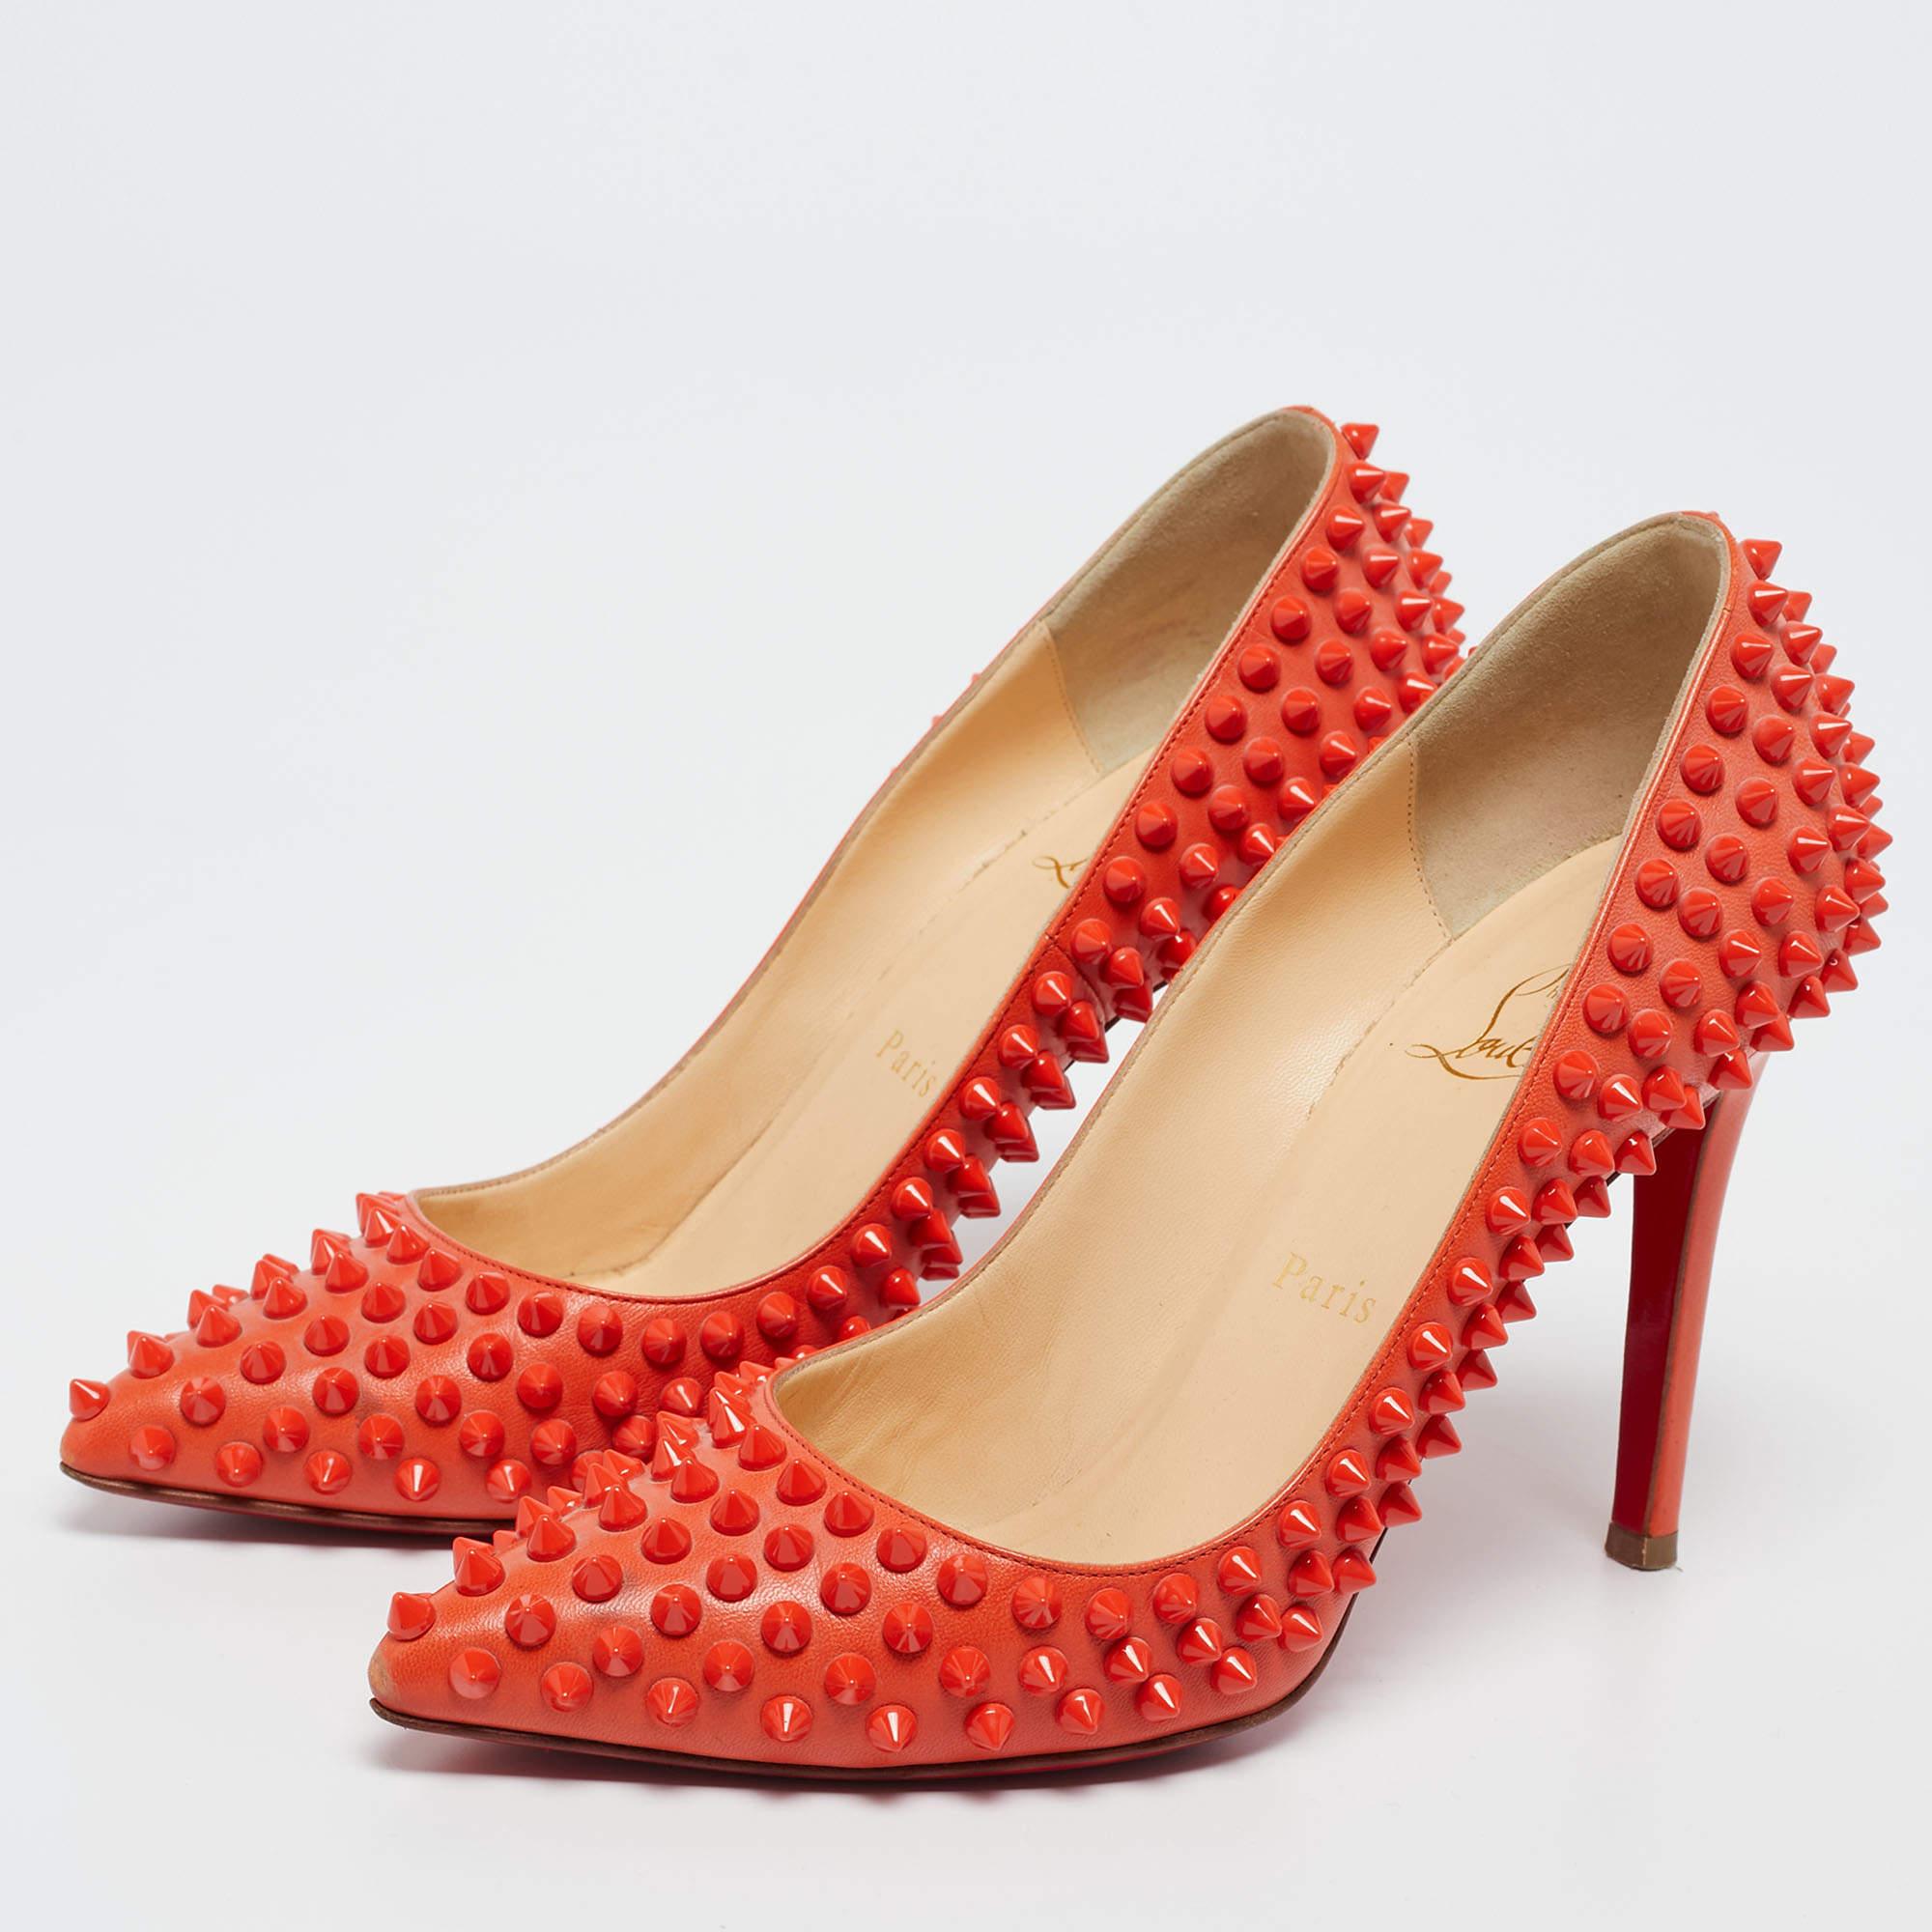 Women's or Men's Christian Louboutin Orange Leather Pigalle Spikes Pumps Size 37.5